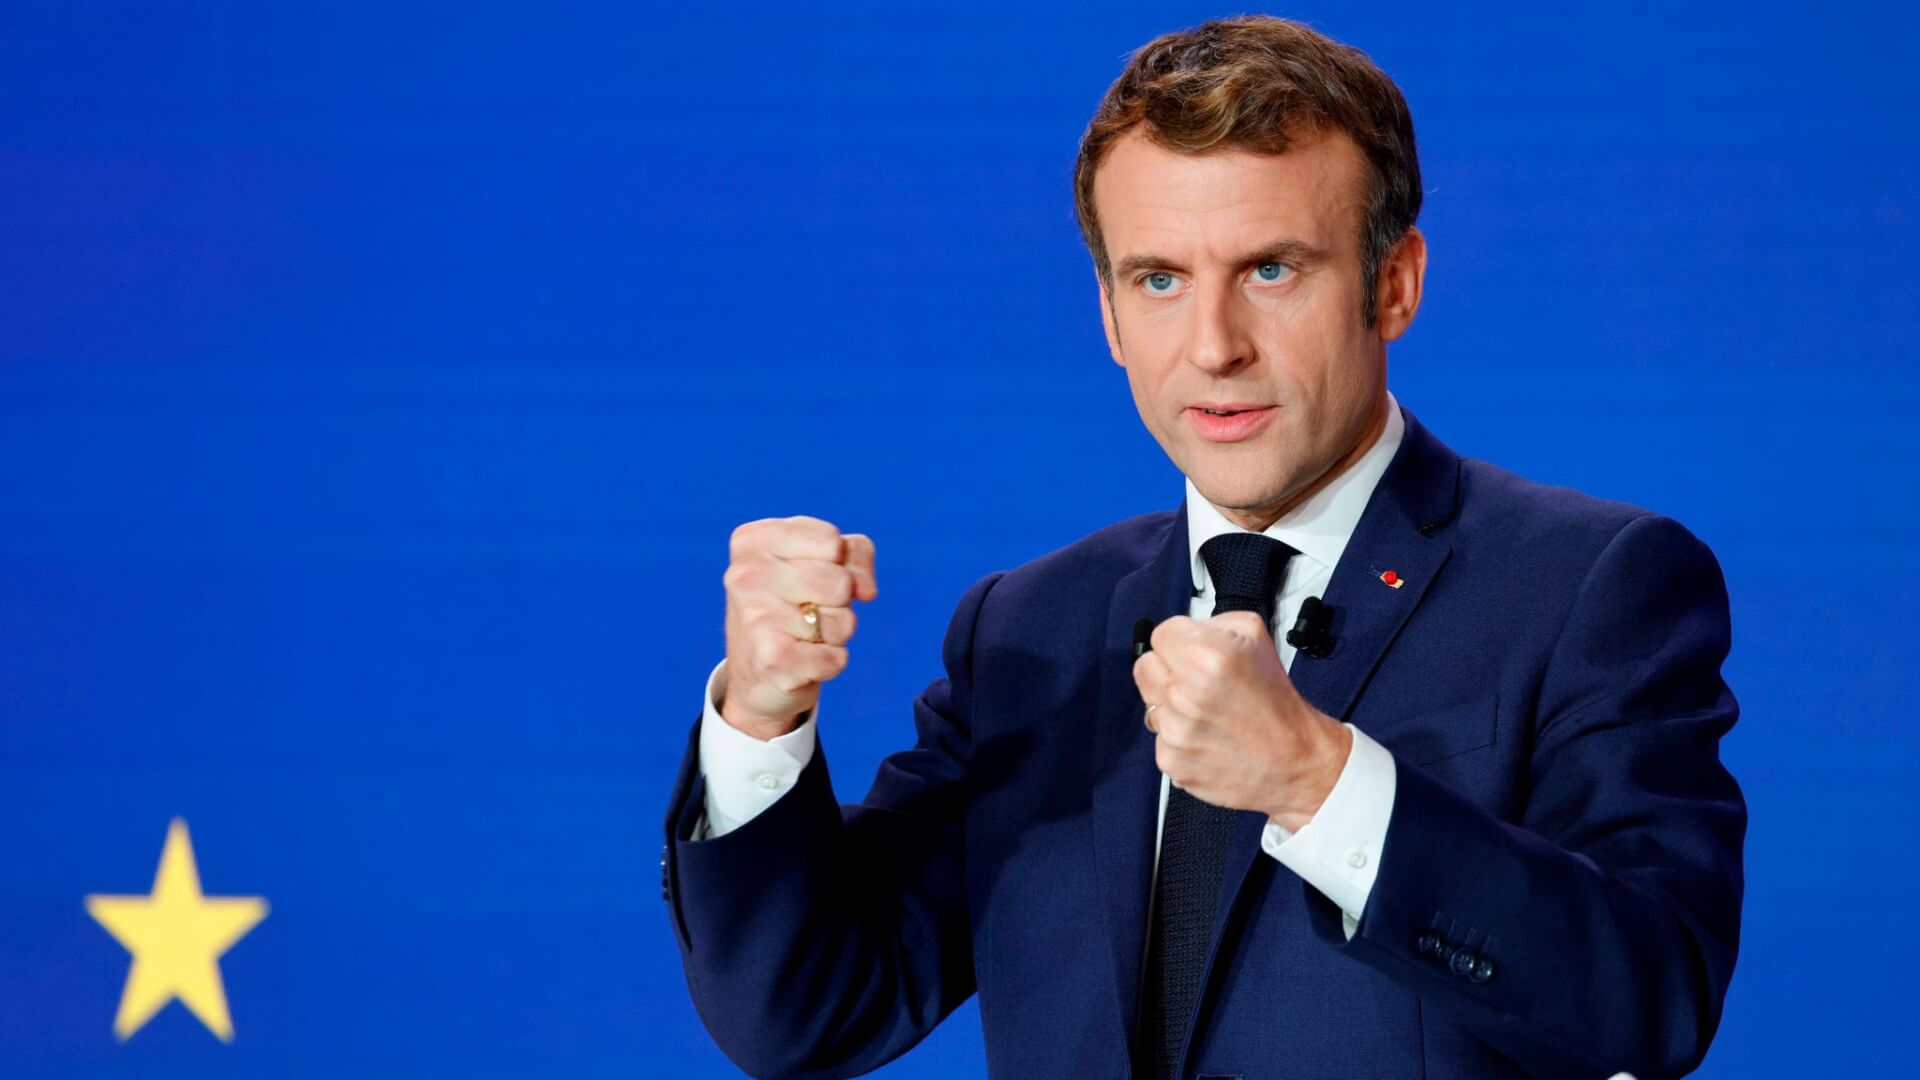 French President Macron Vows to  “Piss Off” Unvaccinated Amid Record COVID-19 Cases